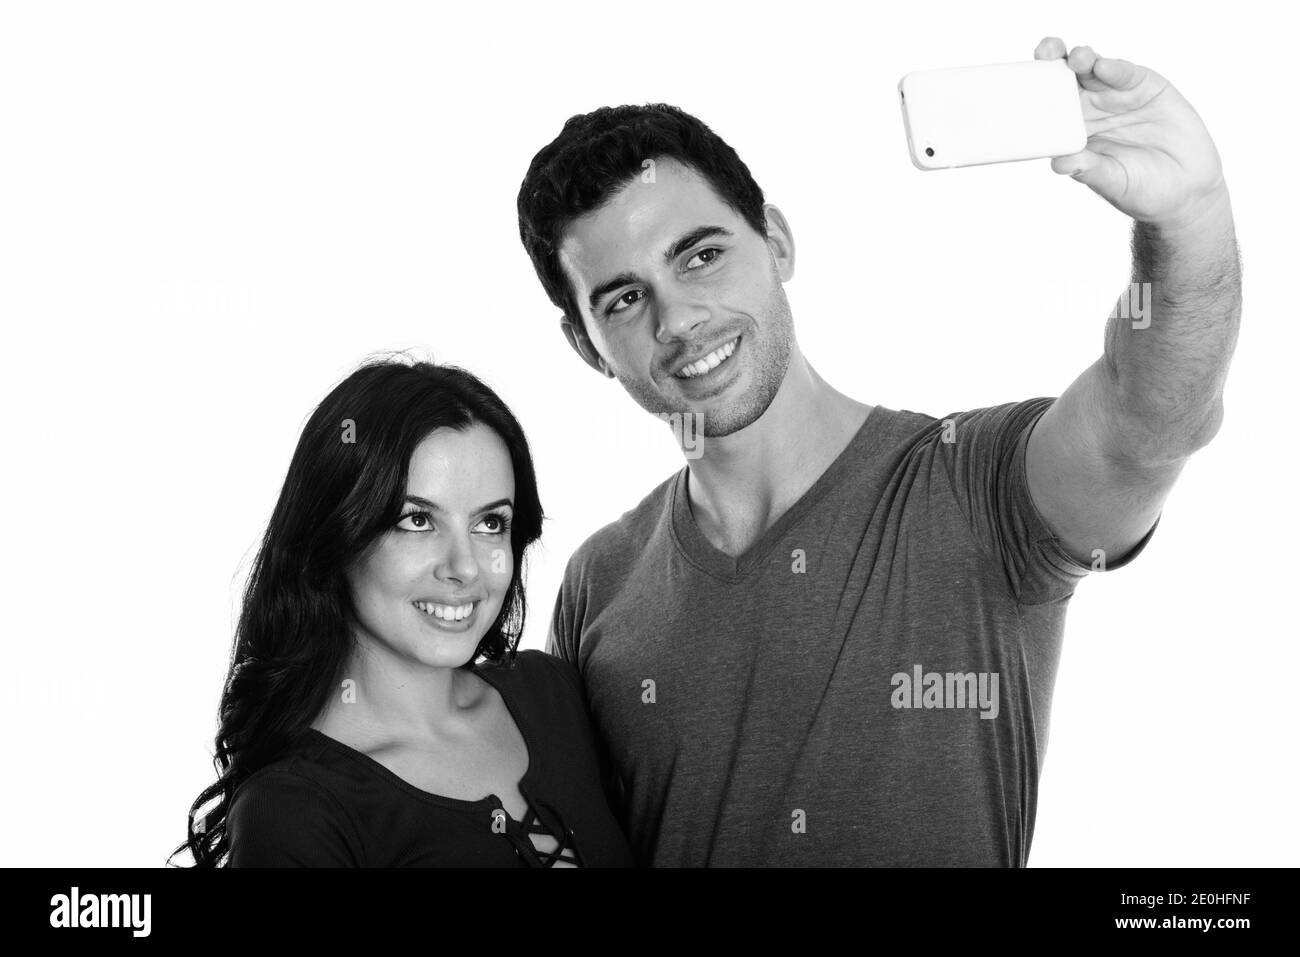 Studio shot of young happy couple smiling while taking selfie picture with mobile phone together with man holding phone Stock Photo